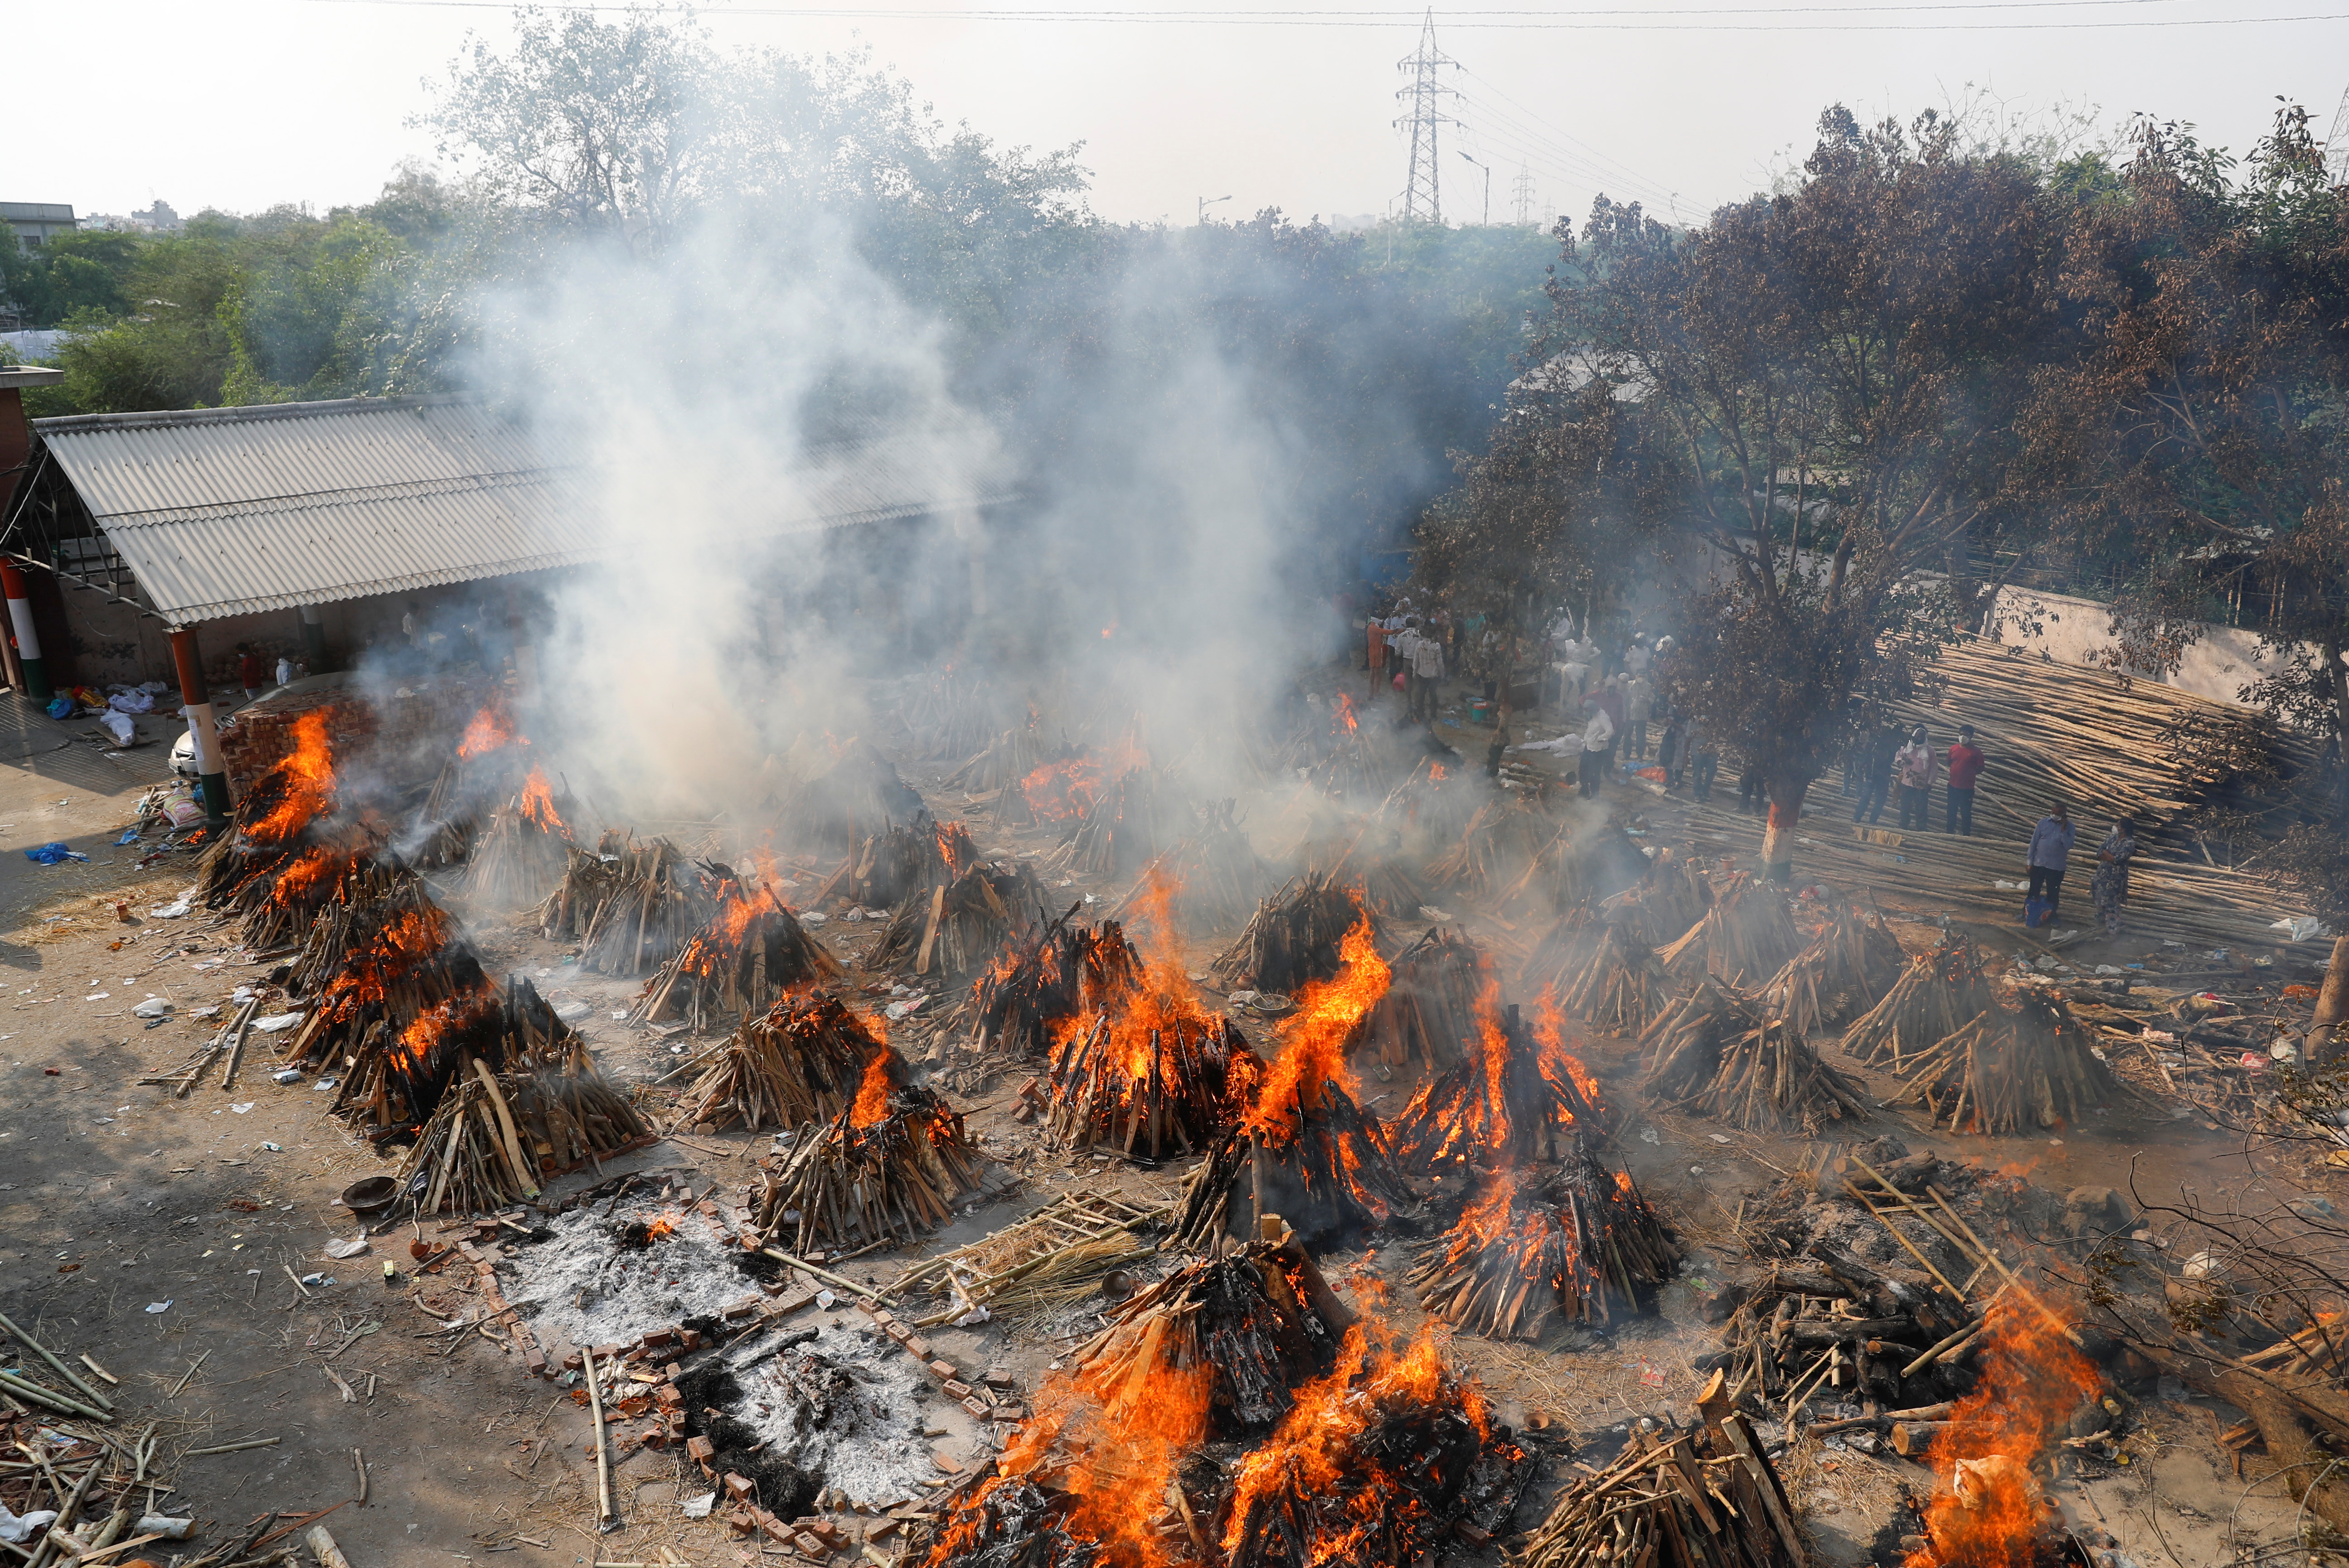 A general view of the mass cremation of those who died from the coronavirus disease (COVID-19) at a crematorium in New Delhi, India April 26, 2021. REUTERS/Adnan Abidi